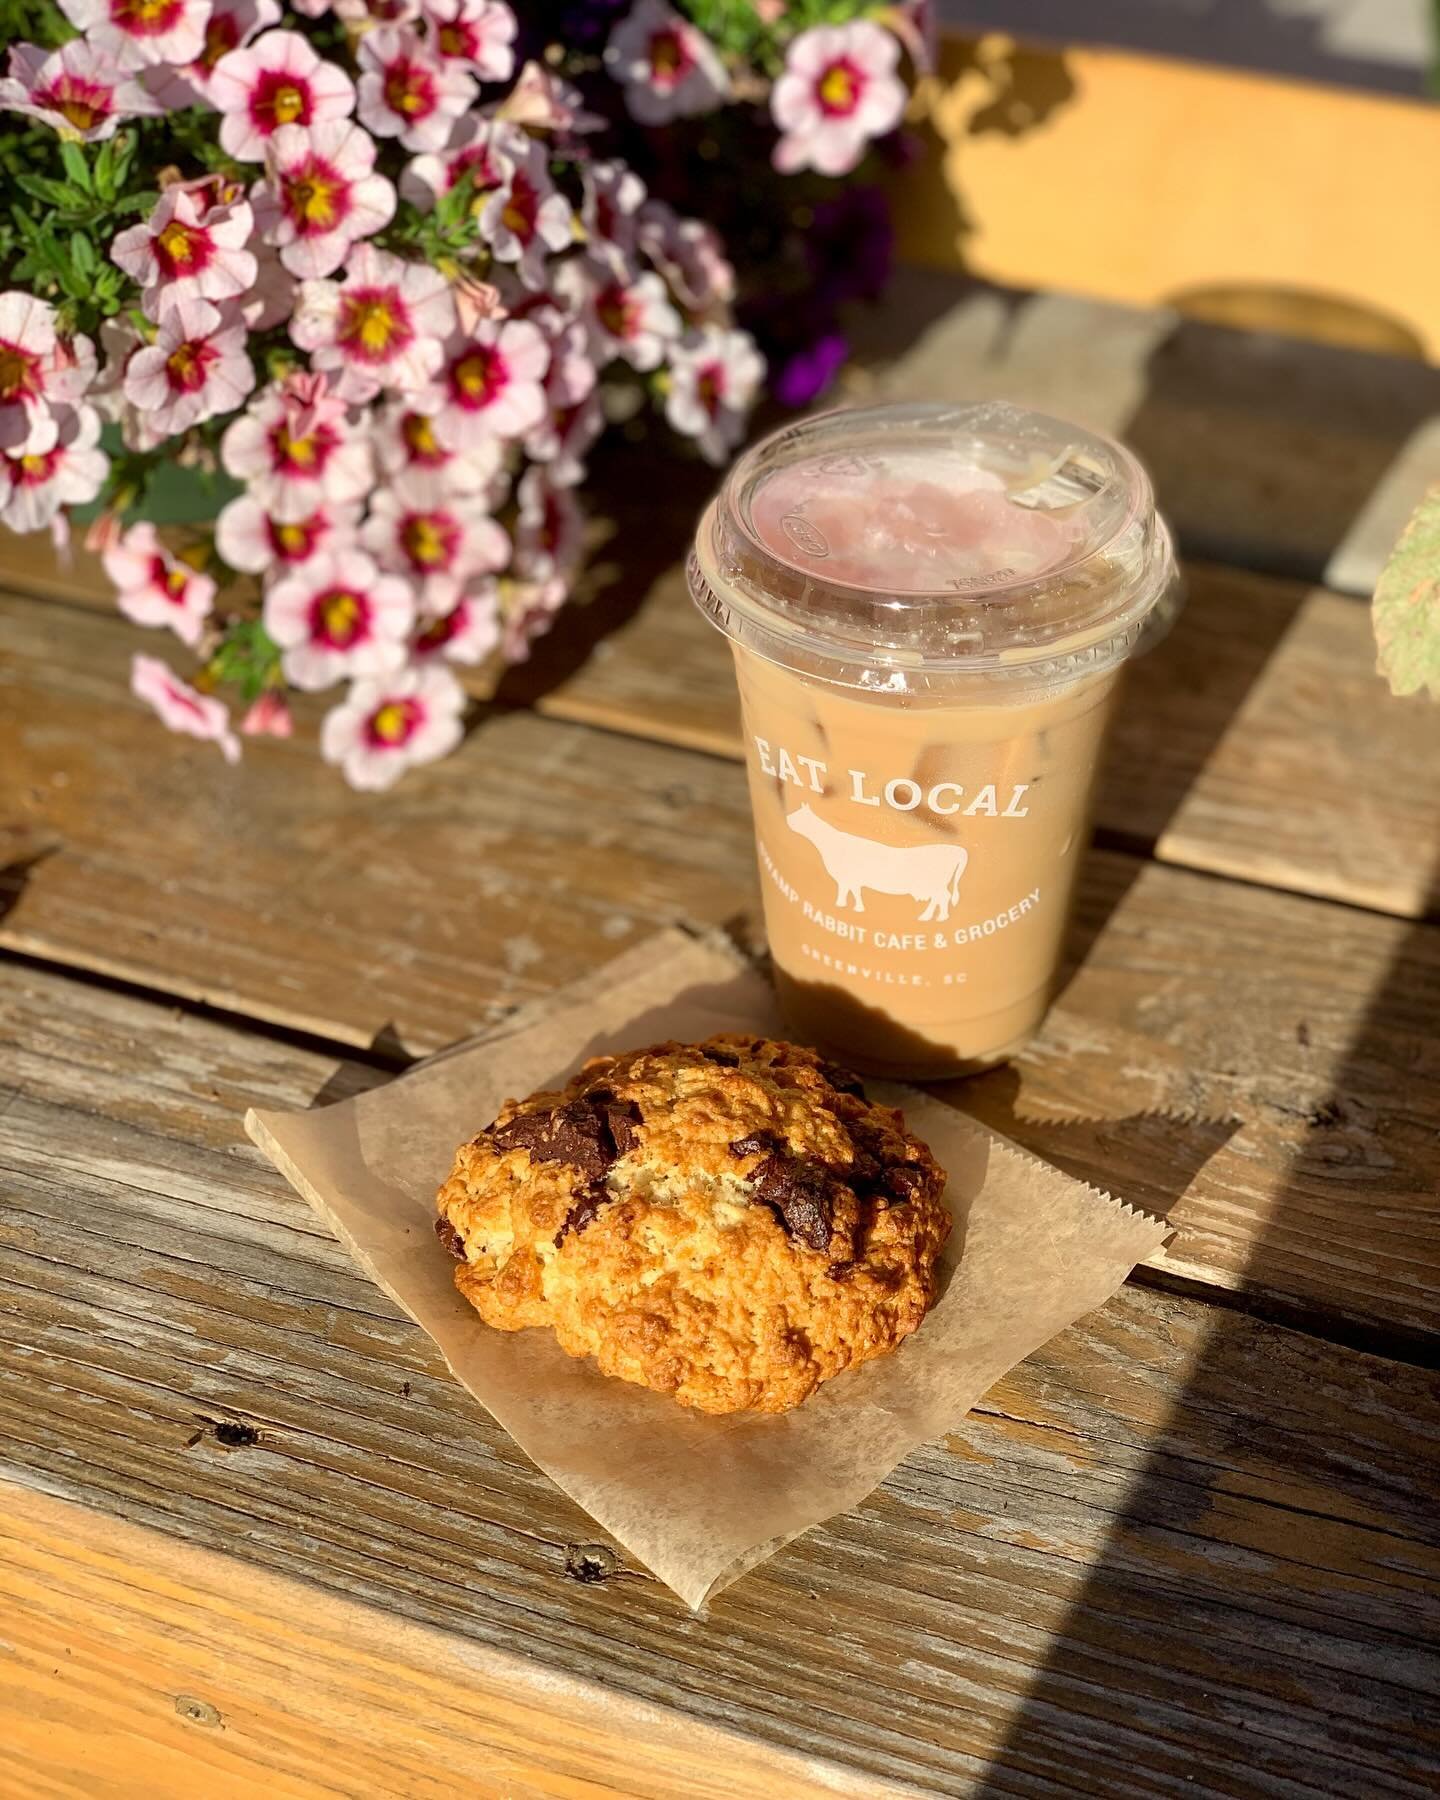 Happy Monday! Time to wake up and smell the flowers. And the freshly baked scones.